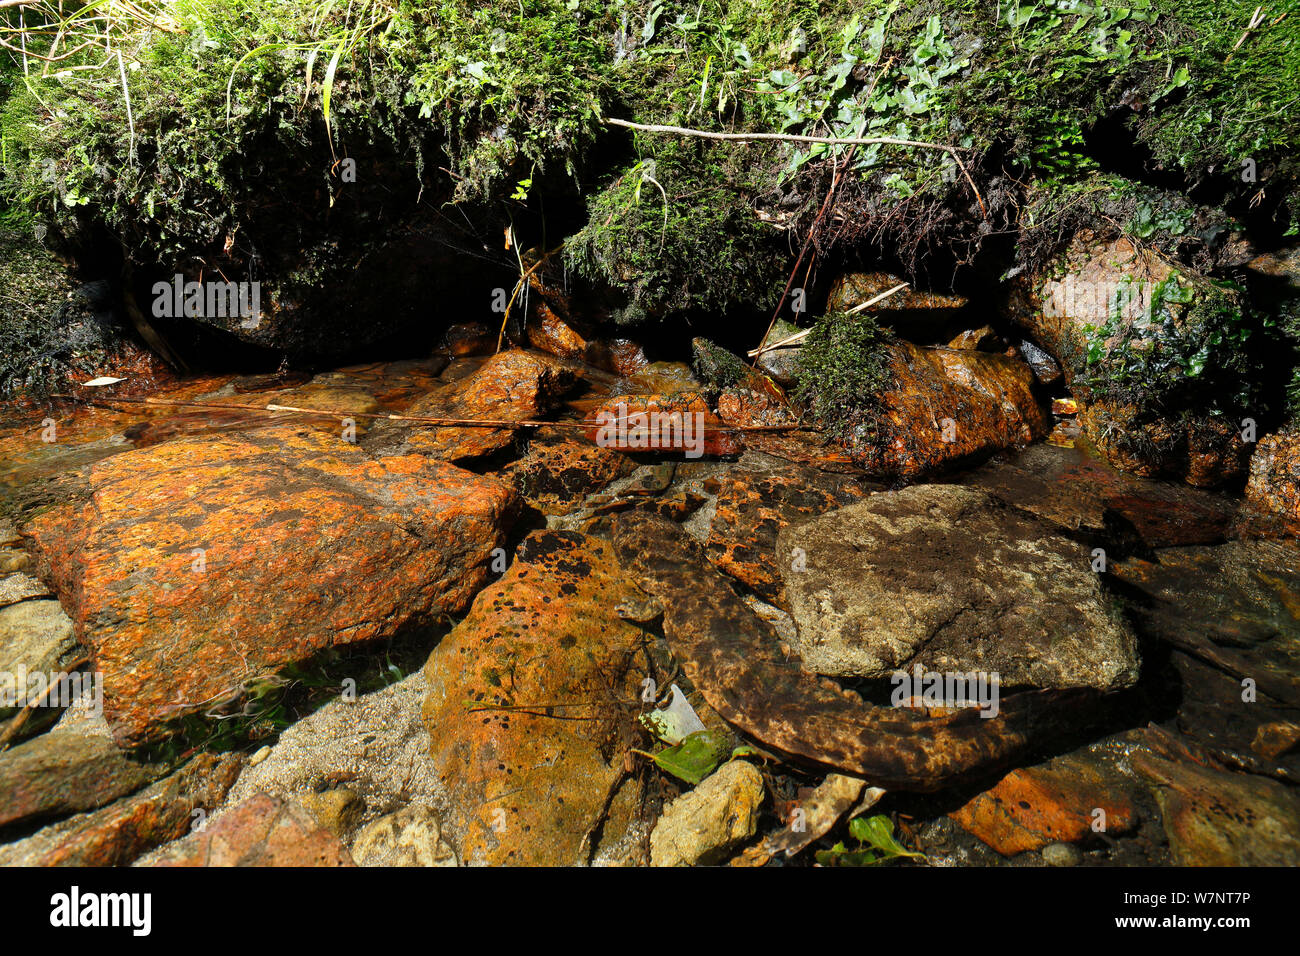 Japanes giant salamander (Andrias japonicus) camouflaged like a stone, Hino River, Tottori, Japan, August. Stock Photo